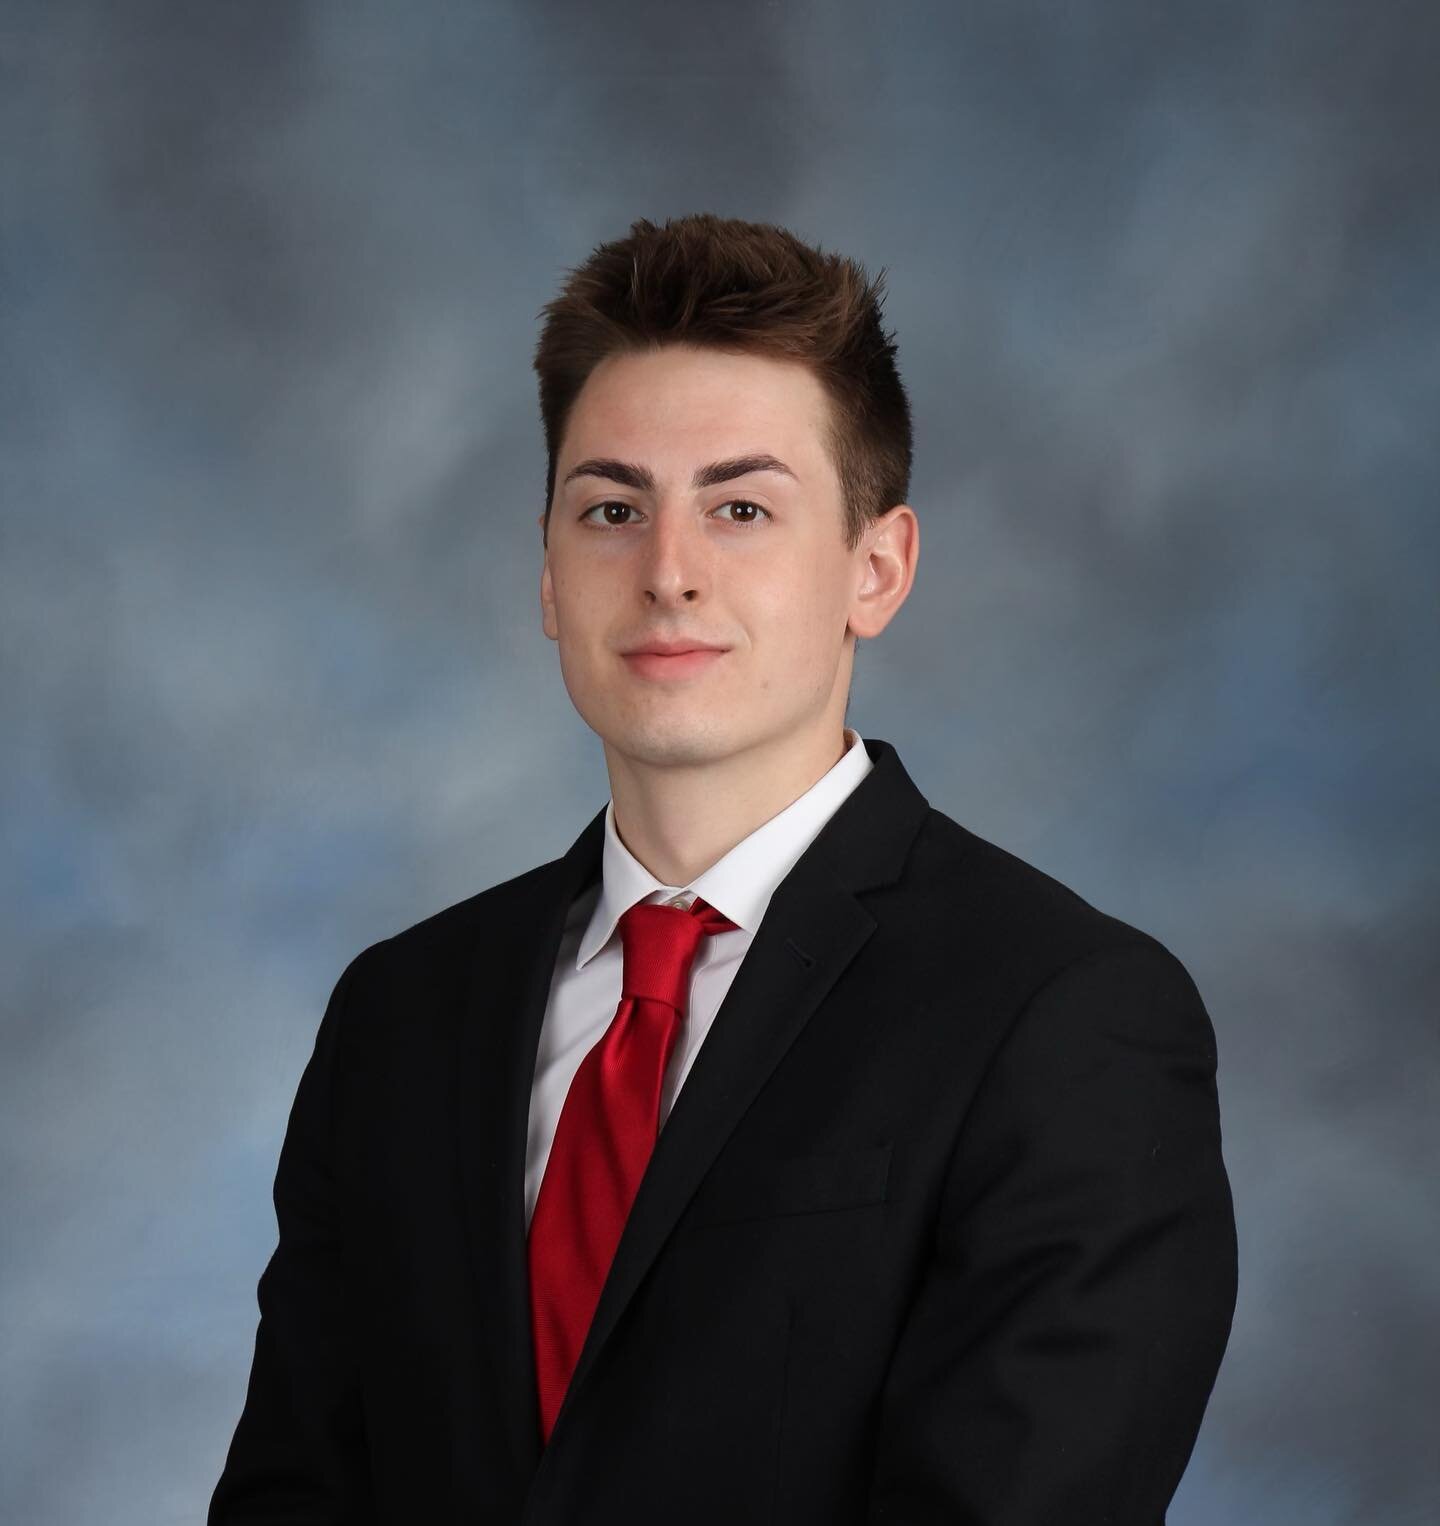 Introducing our VP of Conduct, Robby Lamport in this weeks #spotlightsunday . Robby is a Junior majoring in Finance with plans to pursue a career in commercial real estate or financial analytics! In his free time he enjoys brotherhood, physical activ